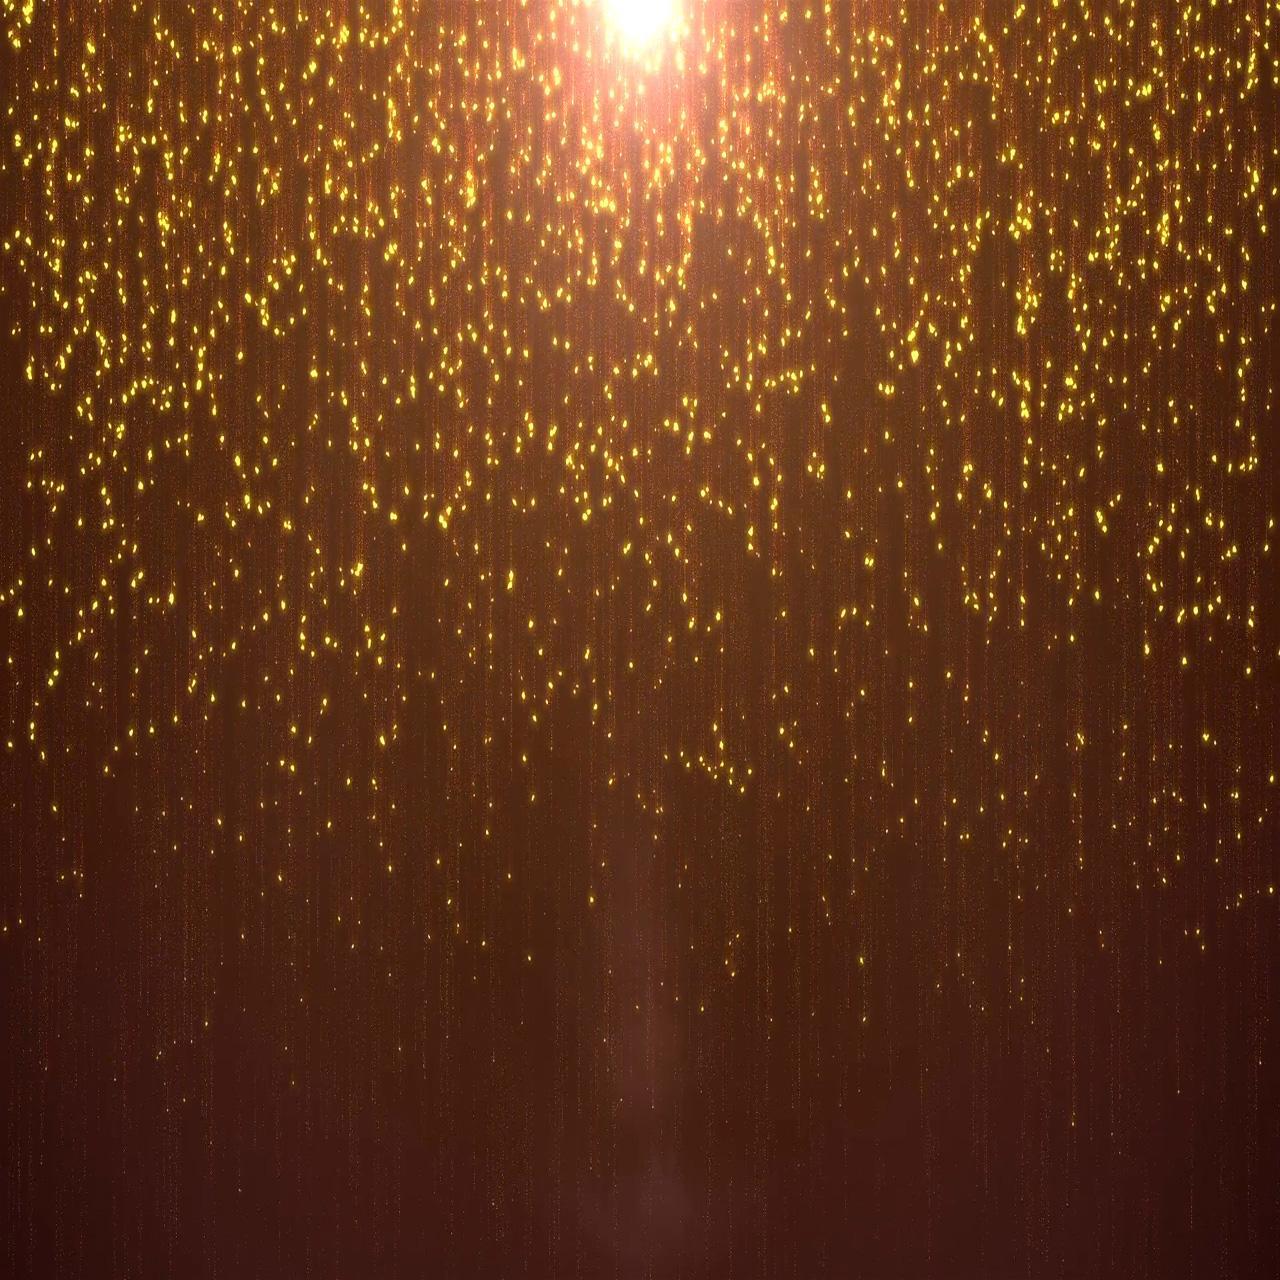 Particle Wallpaper for Android